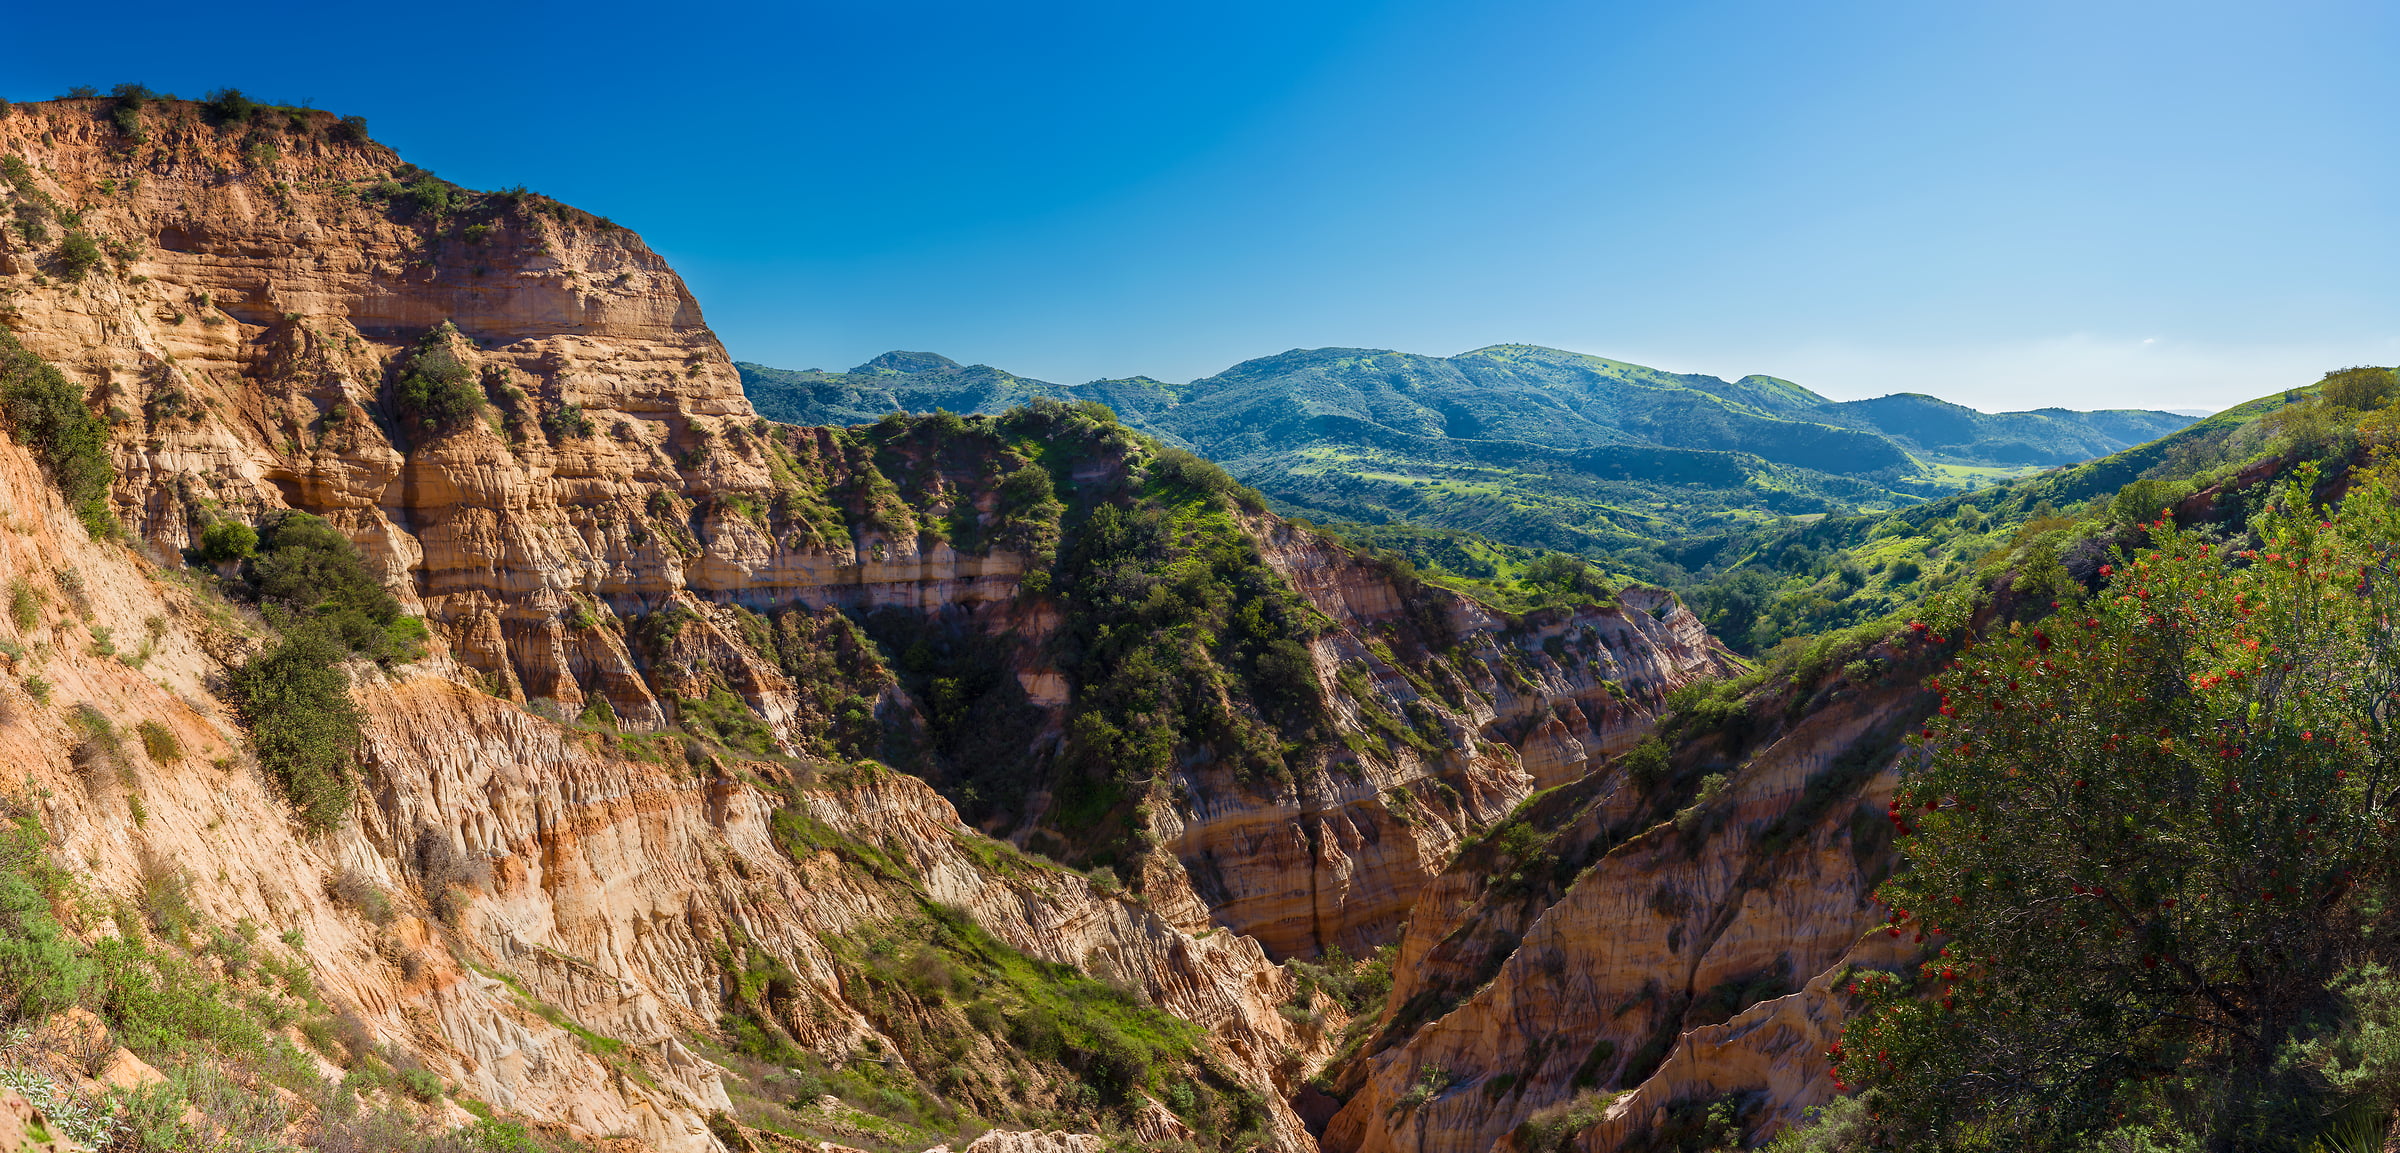 624 megapixels! A very high resolution, large-format VAST photo print of Limestone Canyon Regional Park; landscape photograph created by Jim Tarpo in Limestone Canyon Regional Park, California